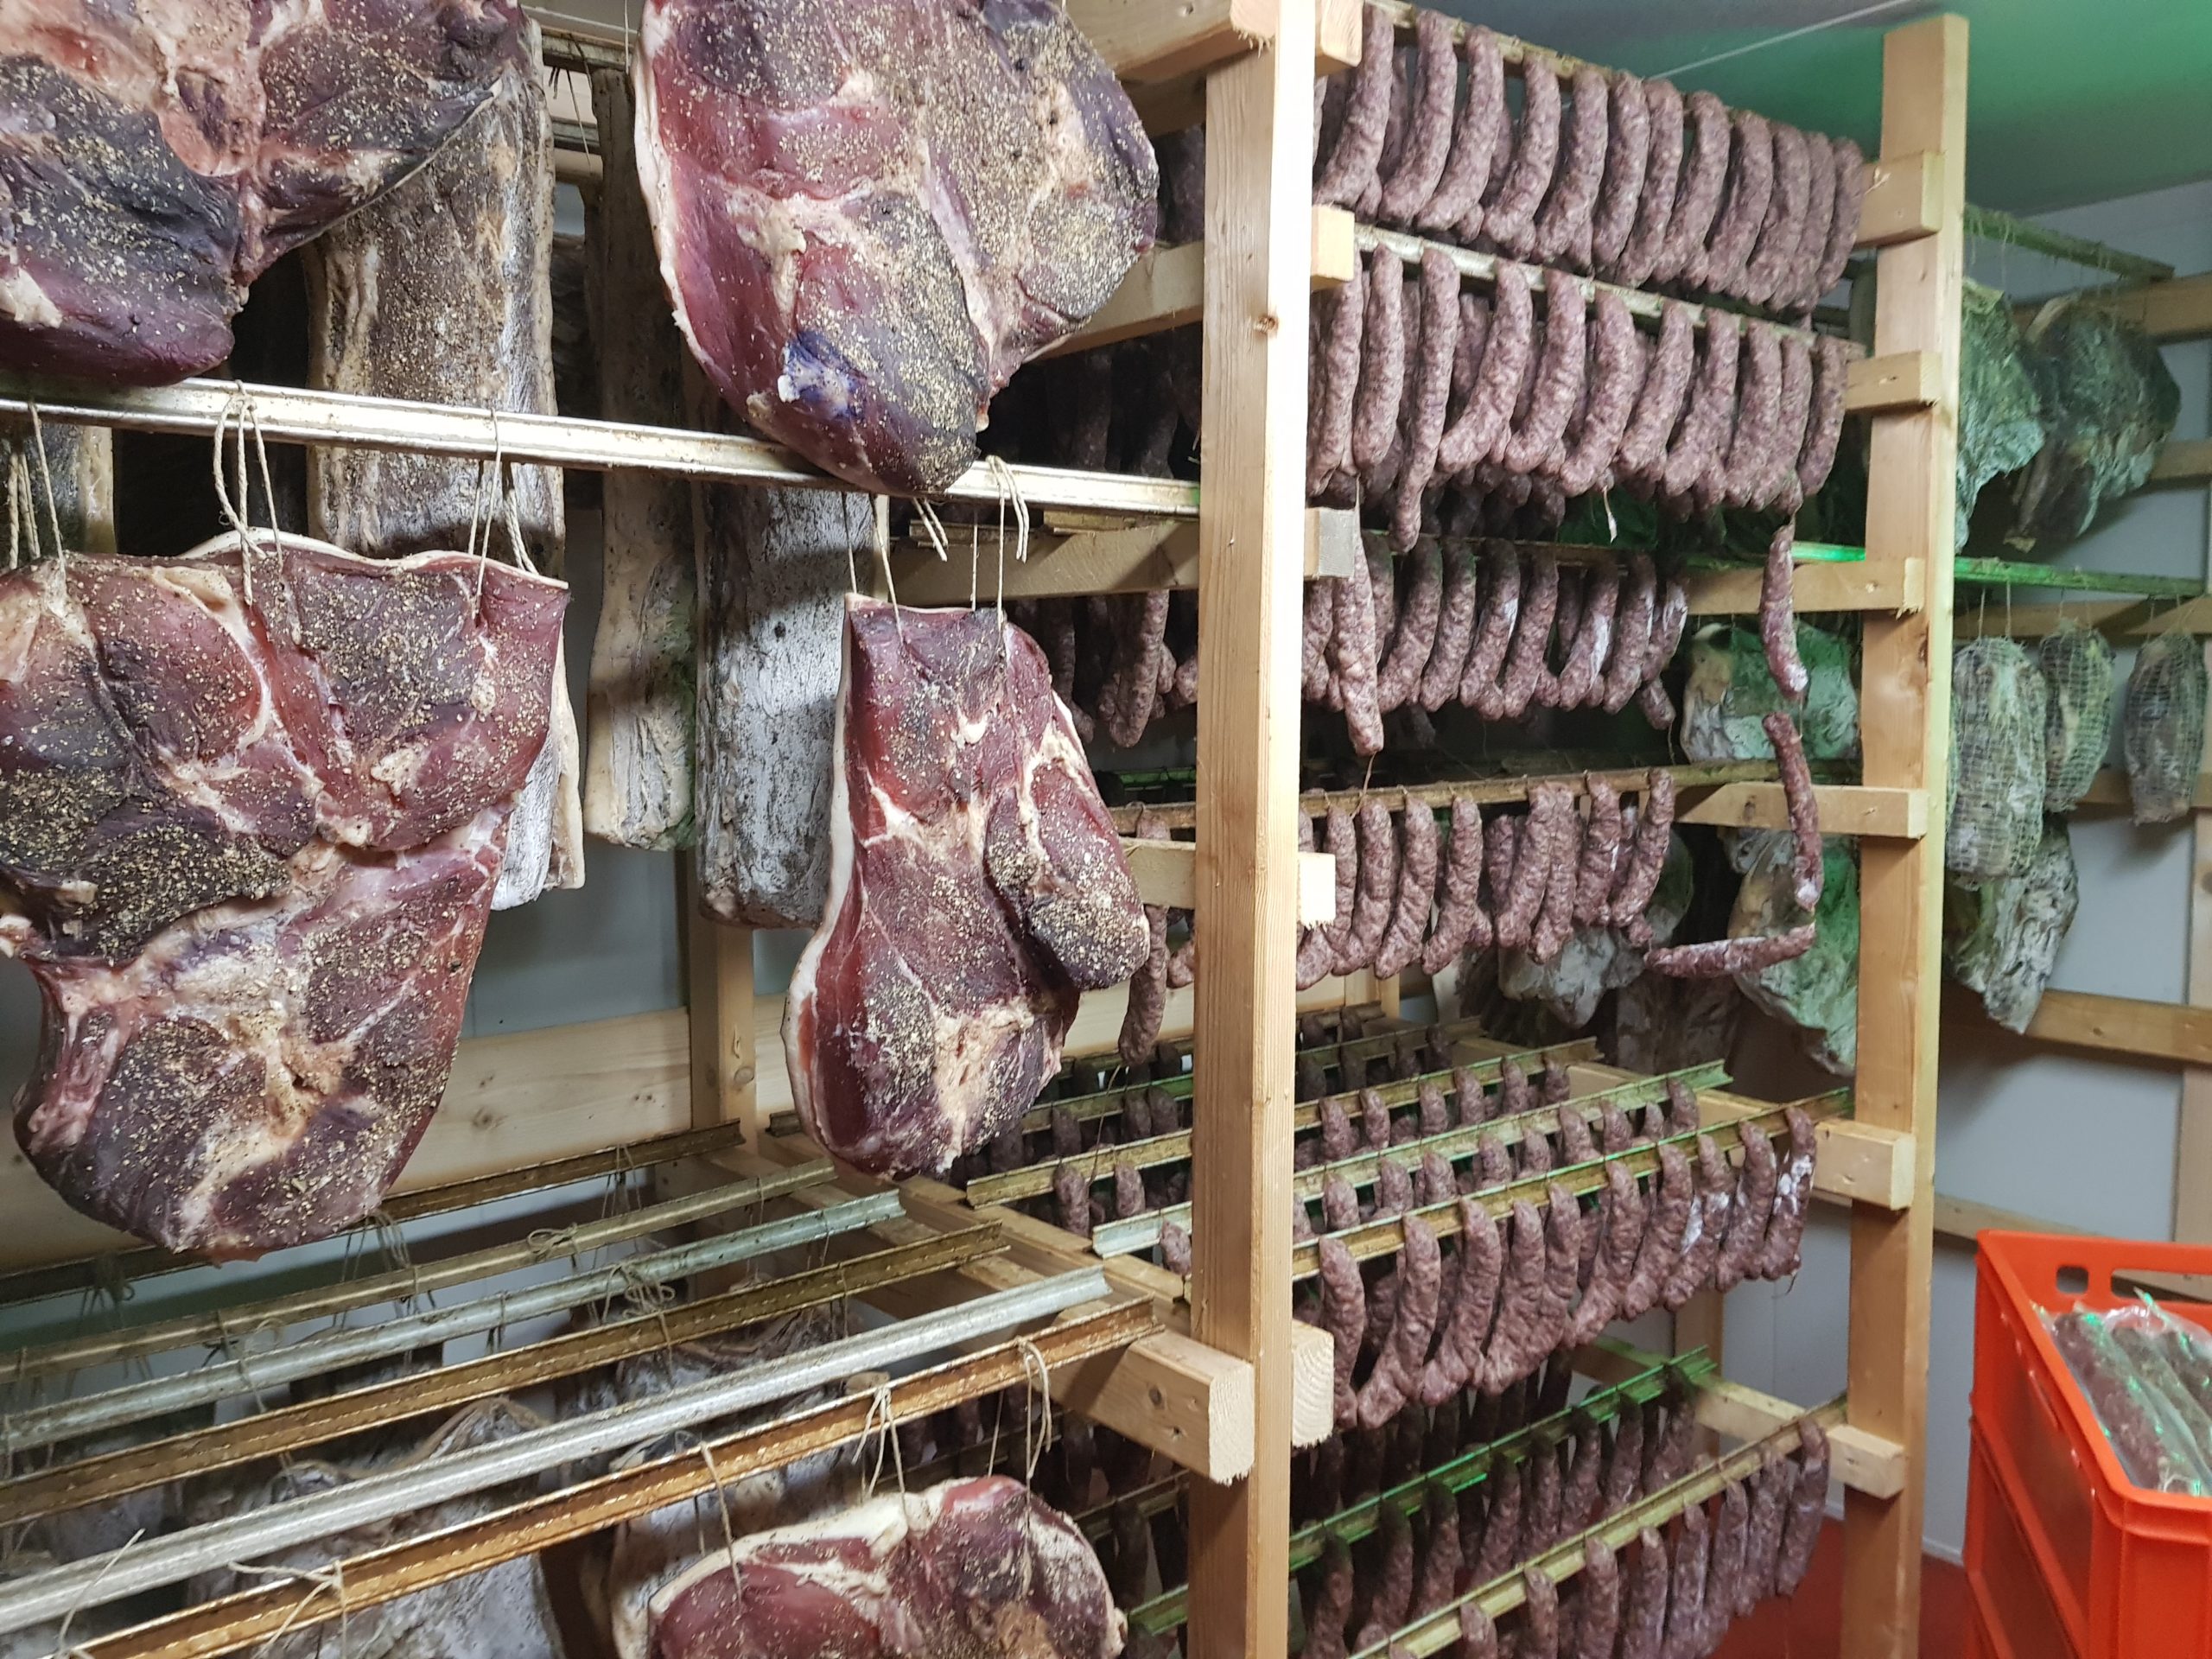 small scale meat production in Austria